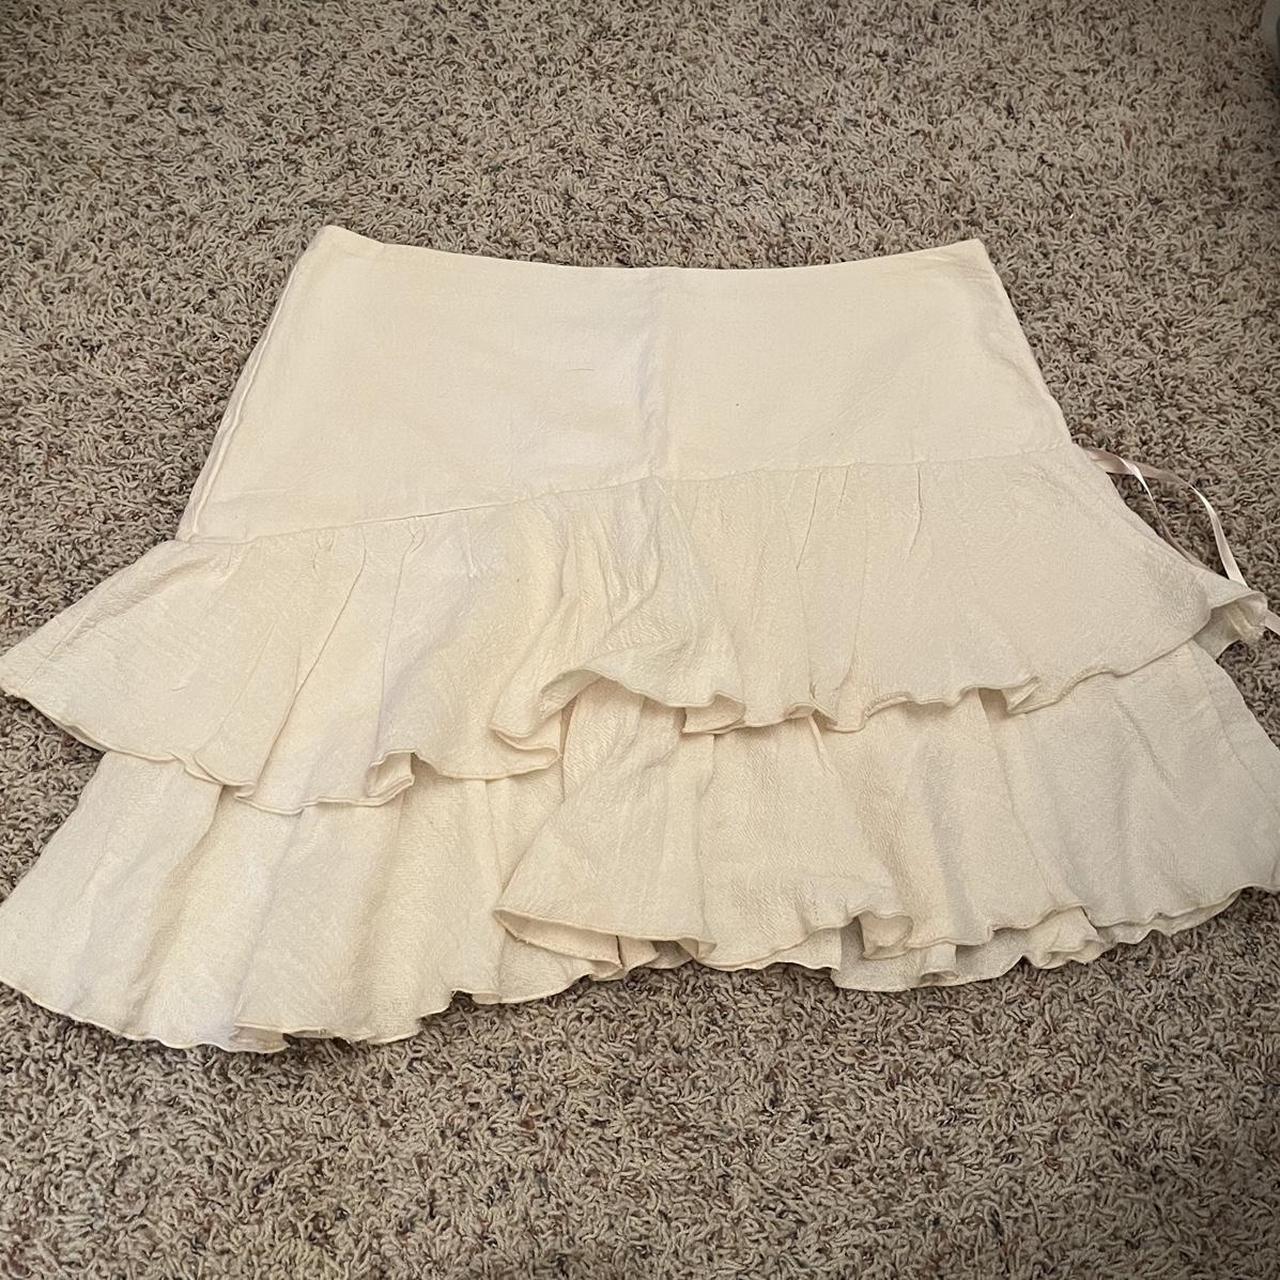 cream mini skirt by the brand azteca lindo, in a... - Depop